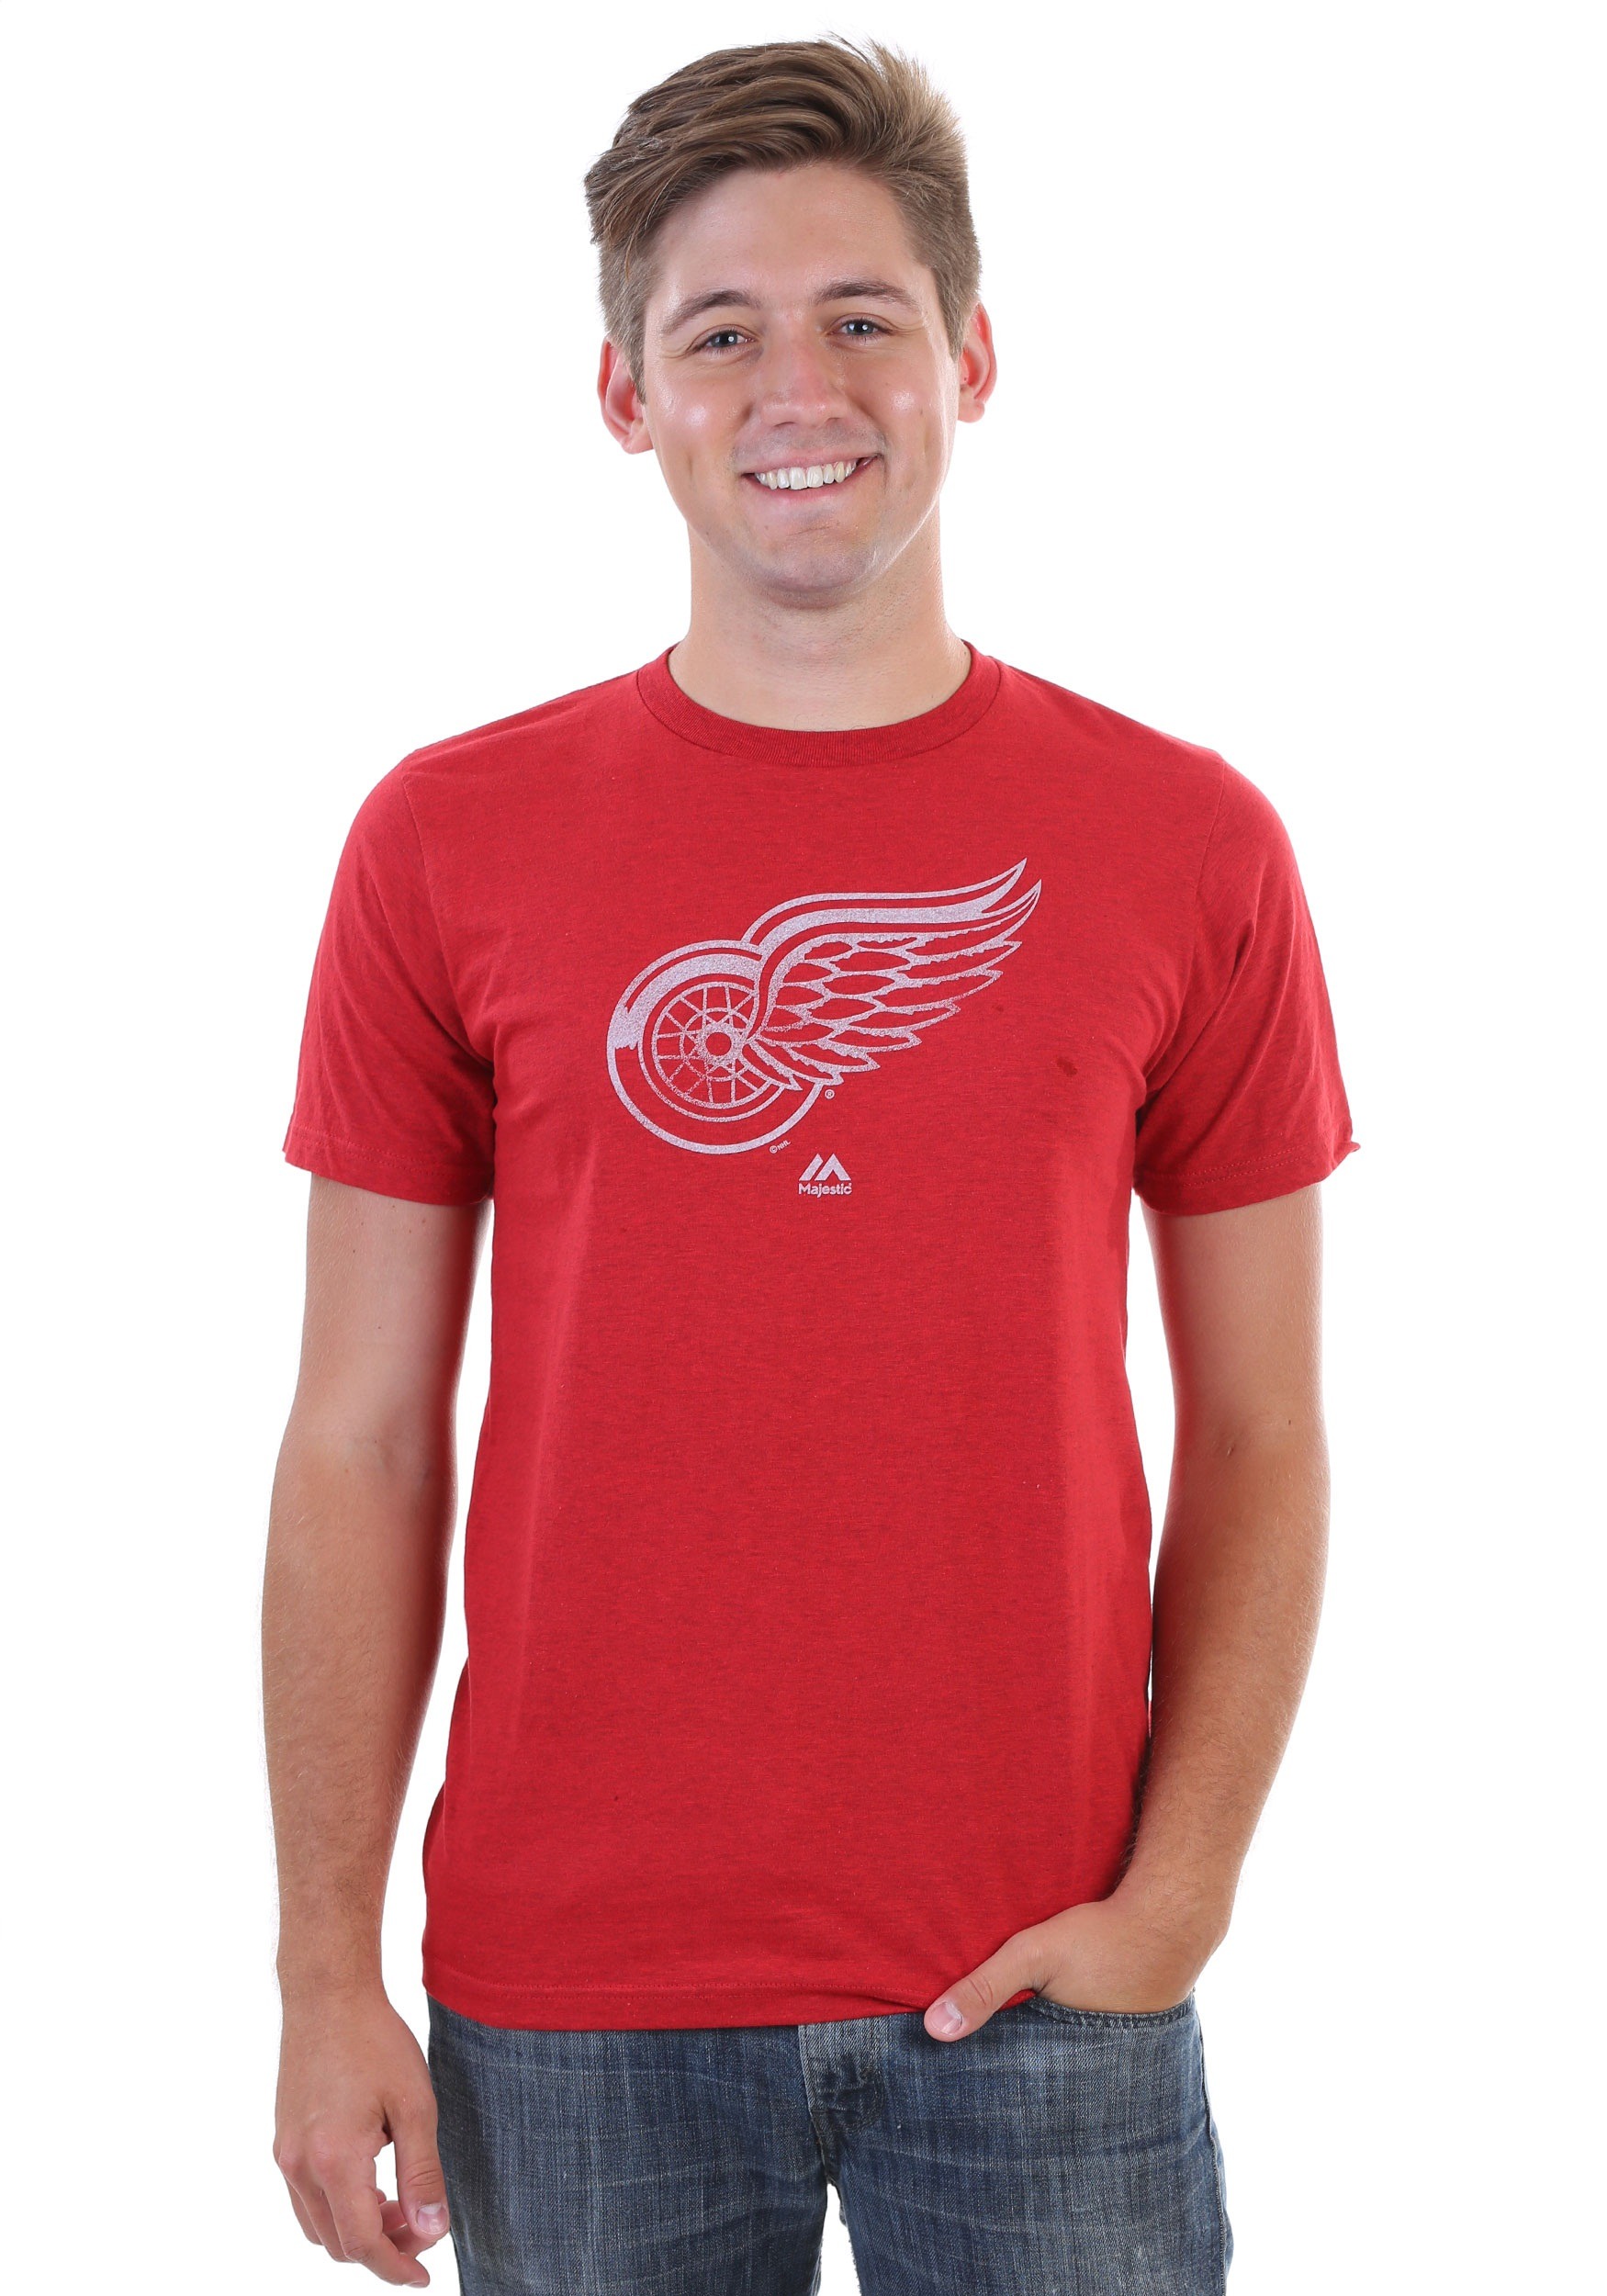 detroit red wings t shirt